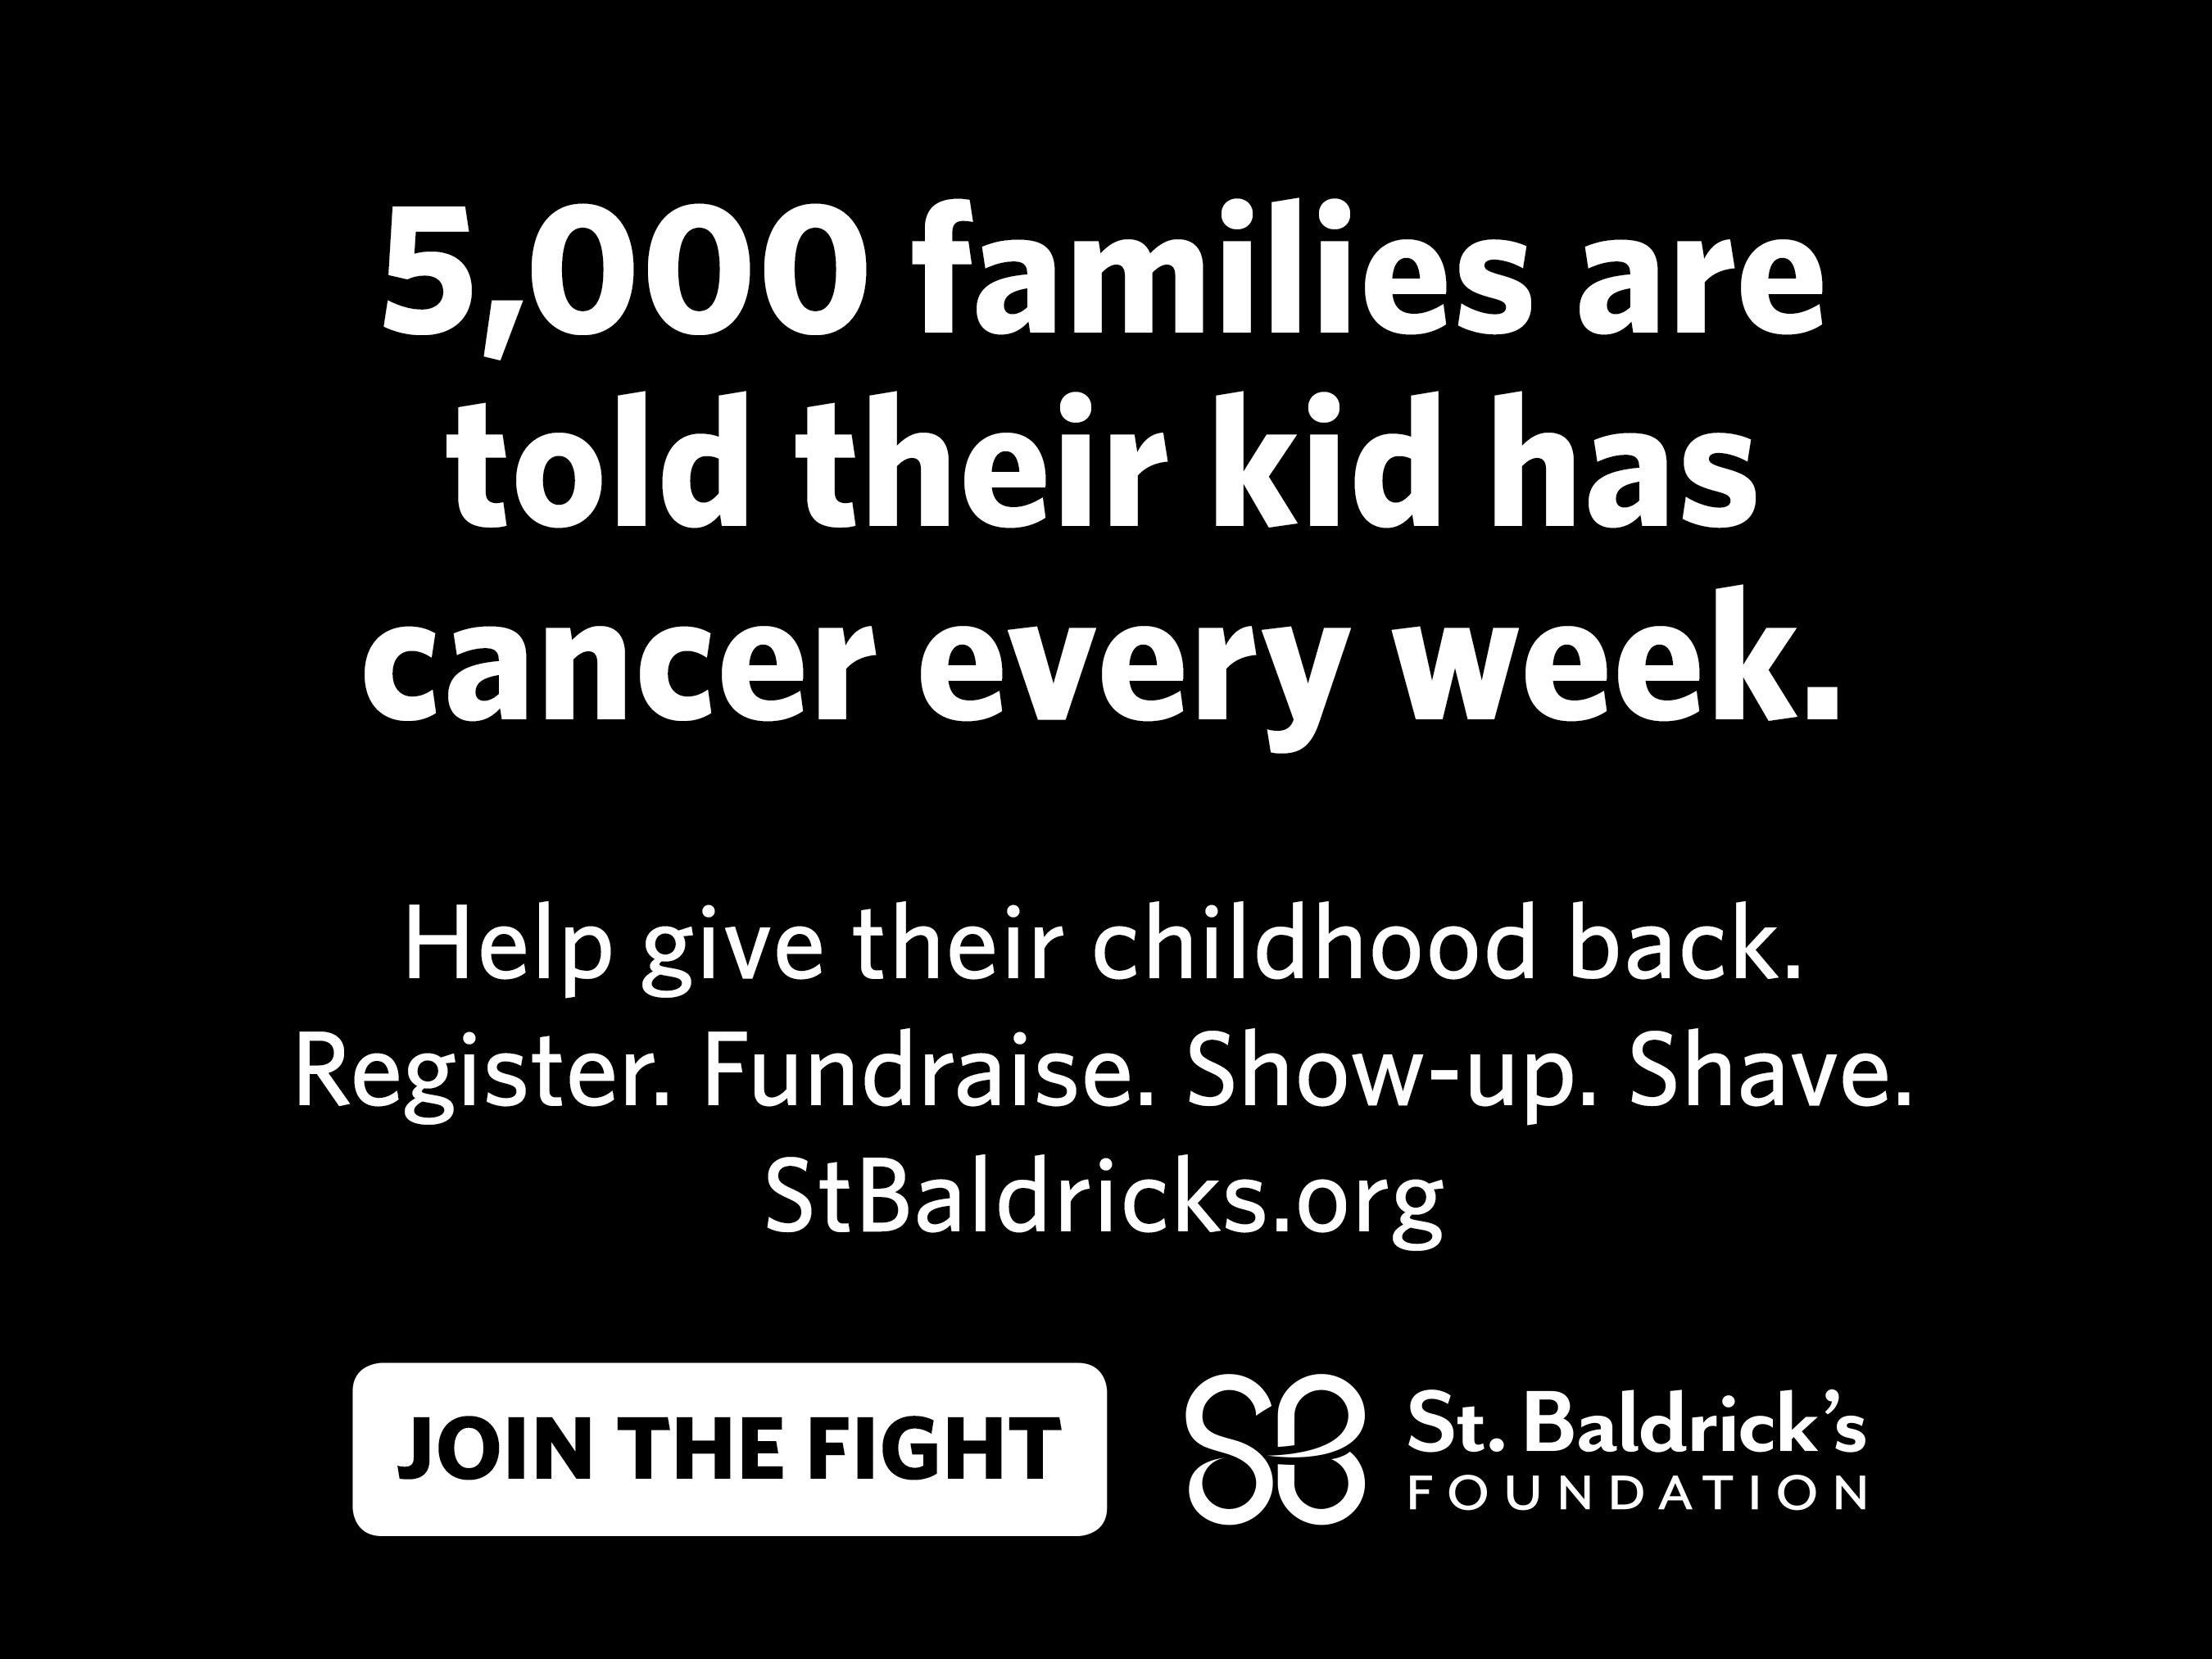 Share this image on social media using the hashtag #StBaldricks and #JoinTheFight.